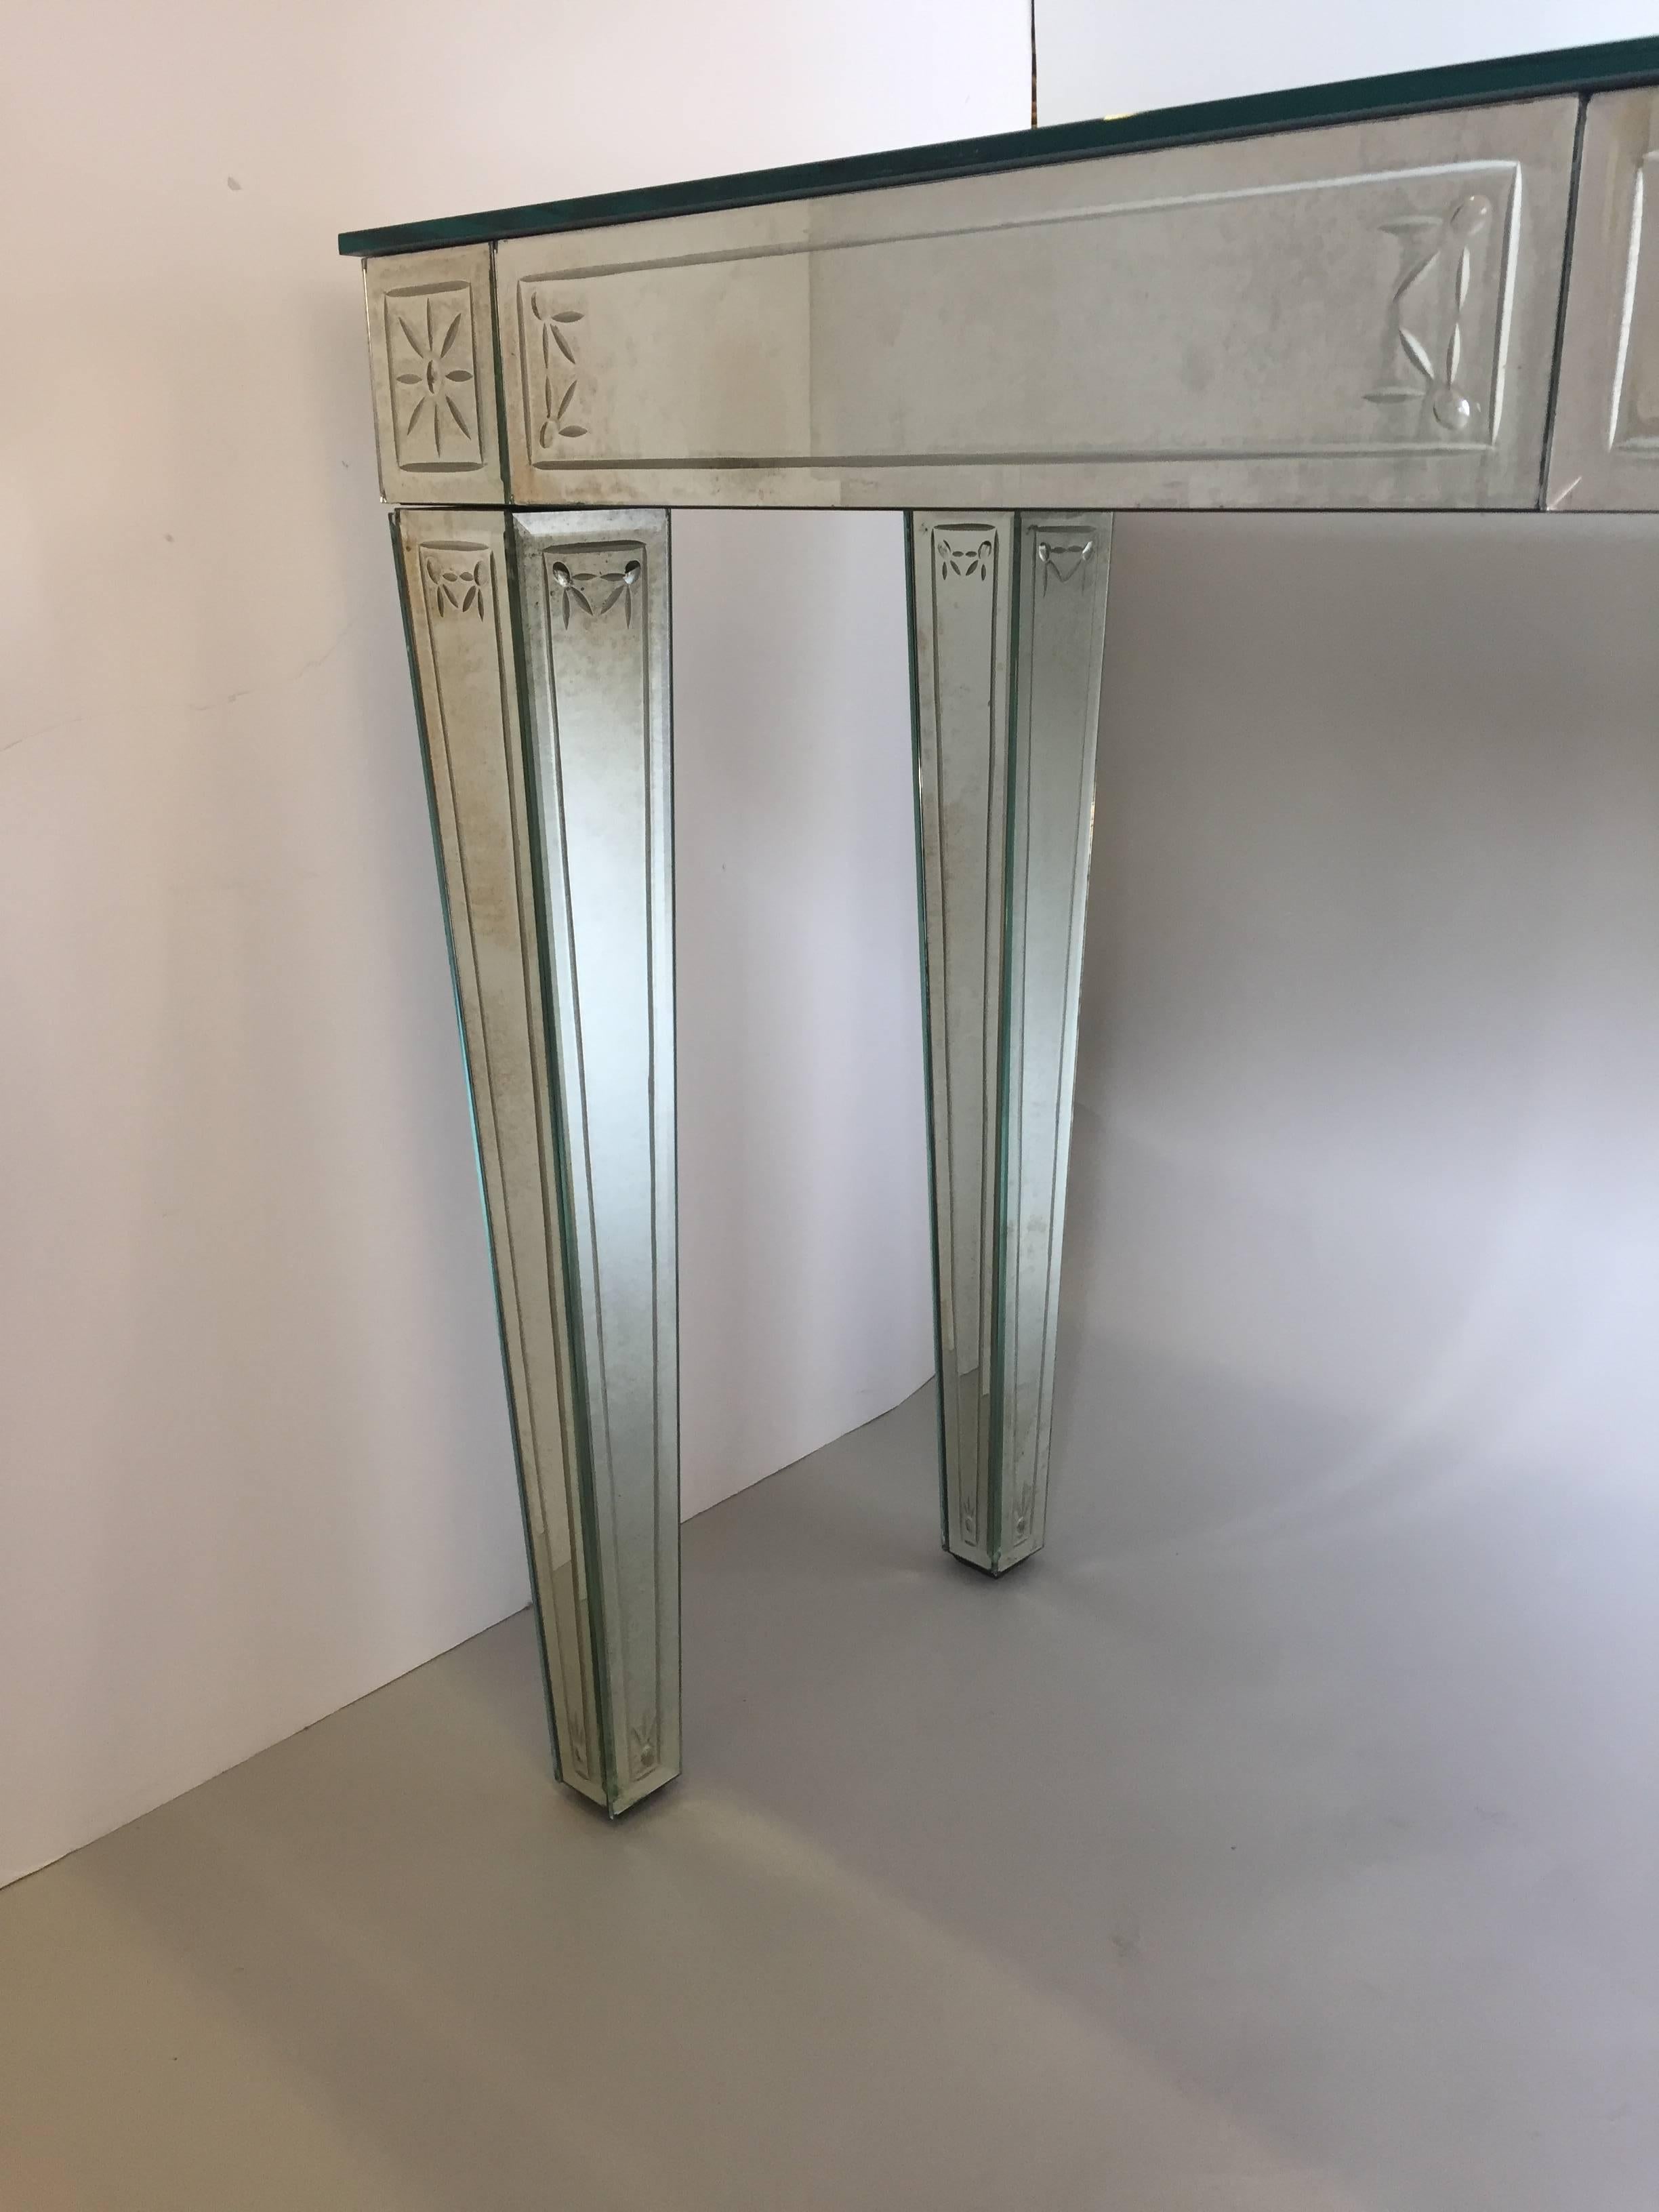 Glamorous bevelled aged mirror console having elegant etched decoration in a neoclassical style.